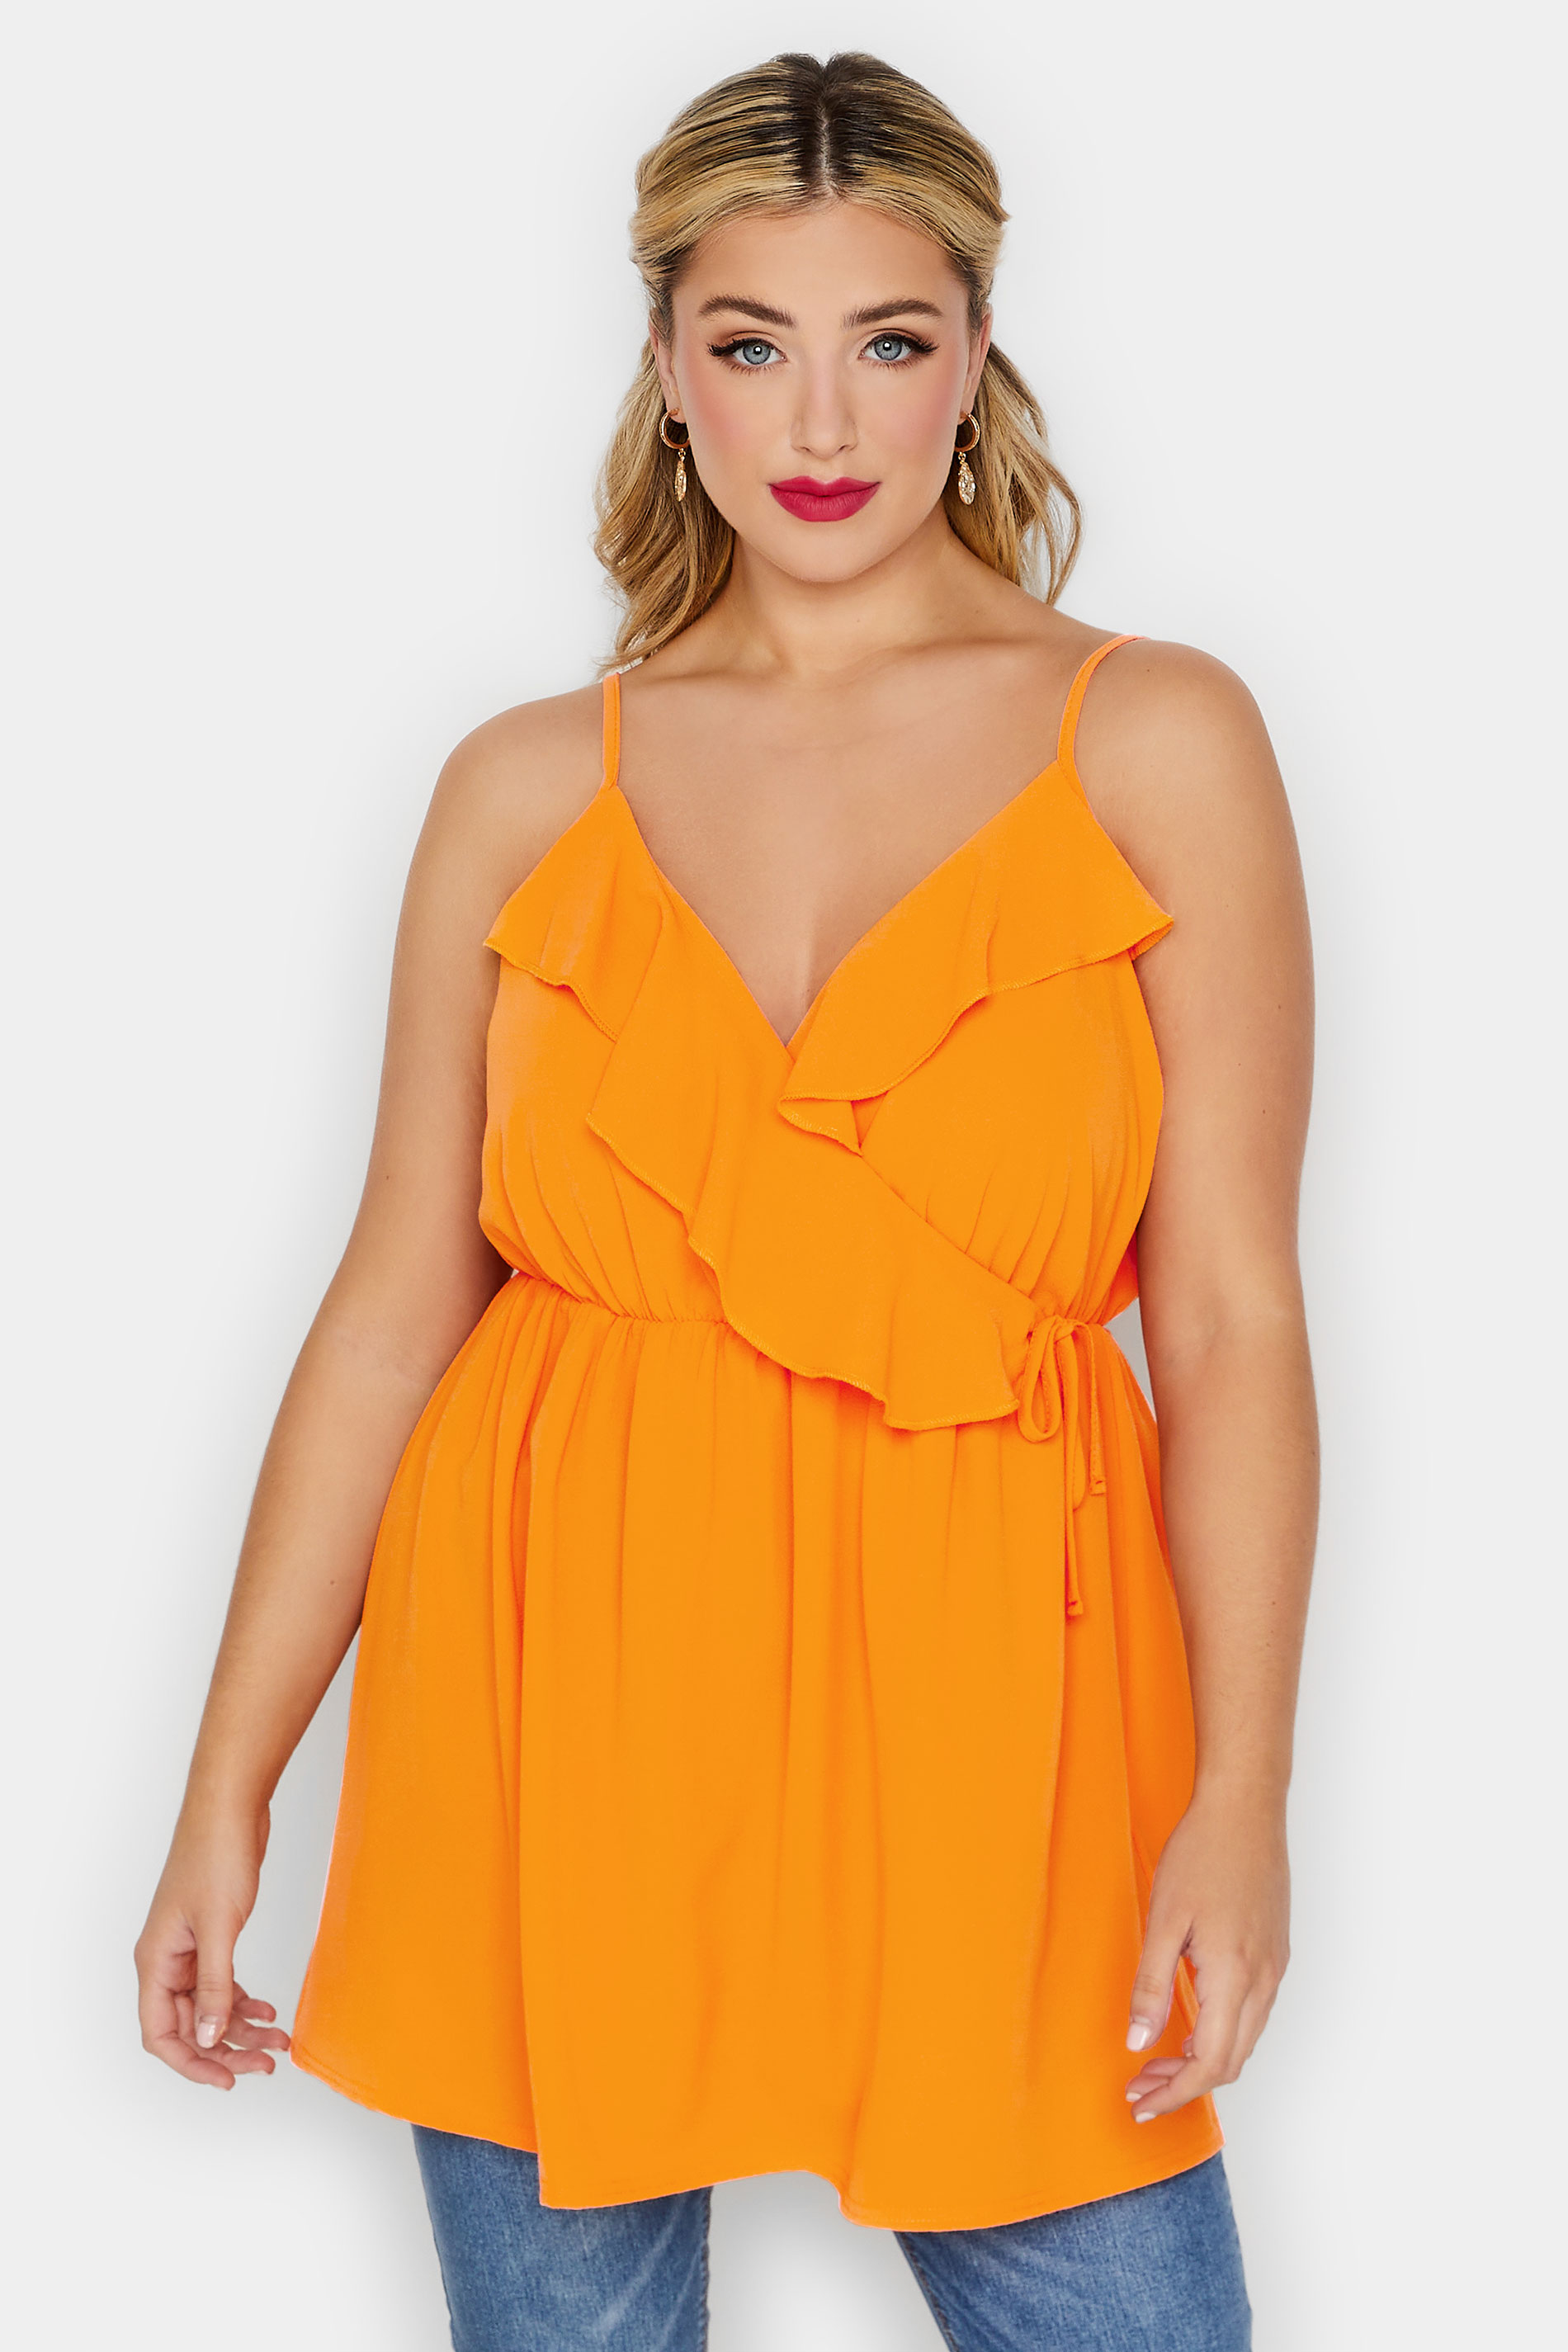 LIMITED COLLECTION Plus Size Orange Wrap Cami Vest Top | Yours Clothing 1